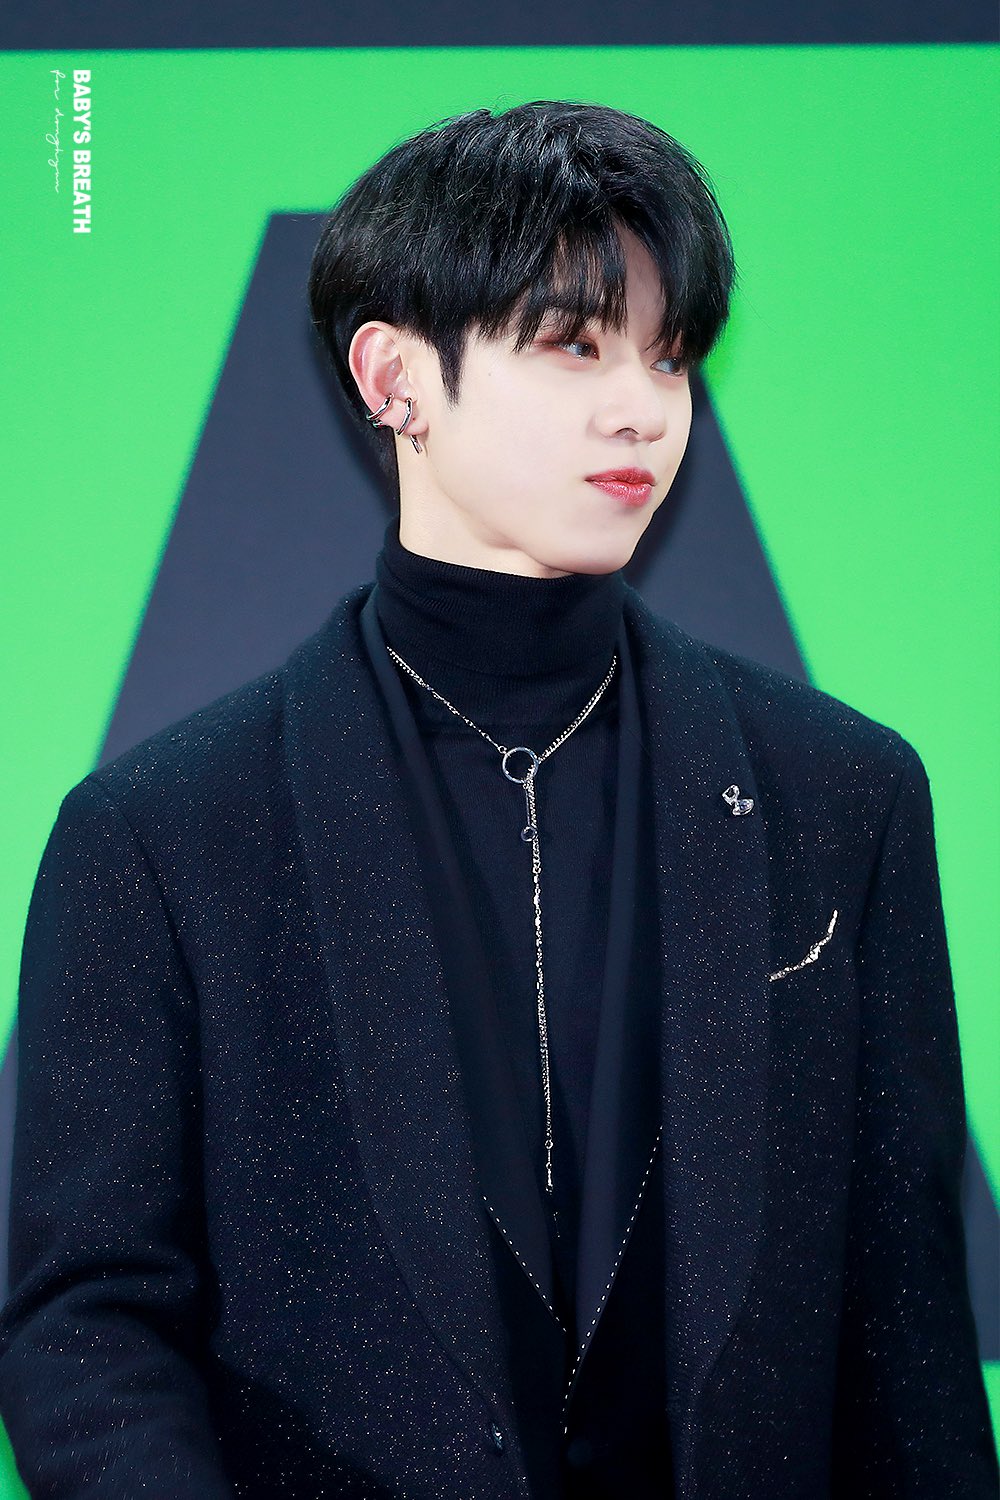 AB6IX s Kim Donghyun Goes Viral For His Sparkling Visuals 